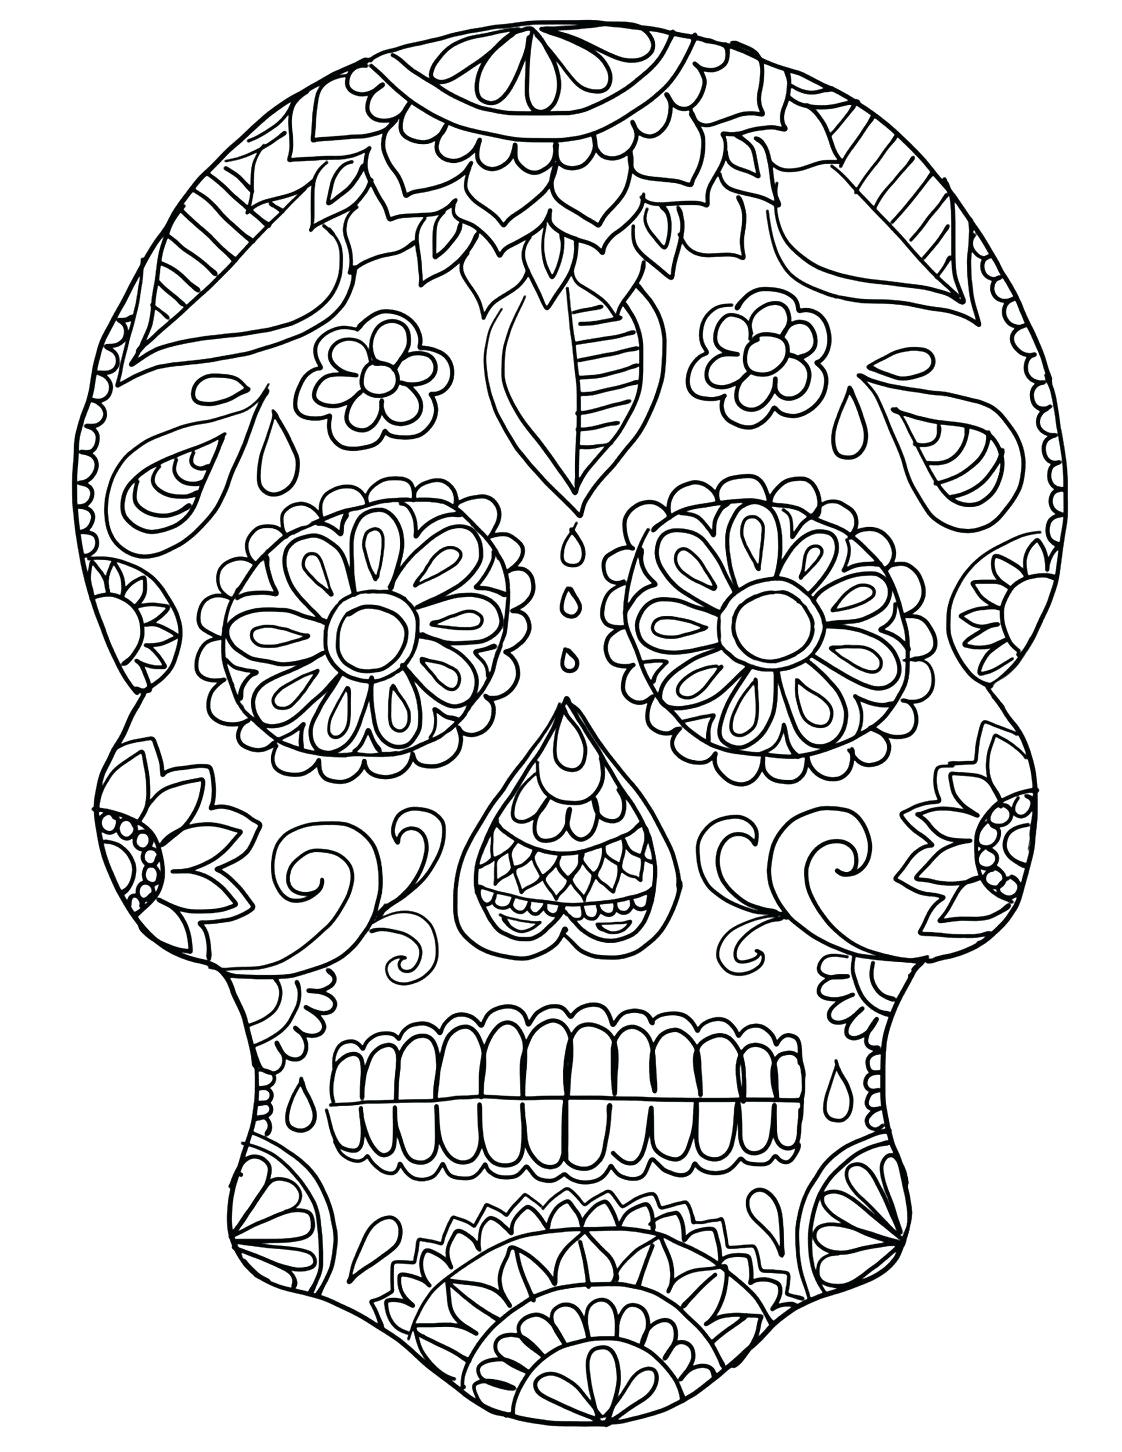 Coloring Pages : Kidston Coloring Pages Halloween Crafts For ...